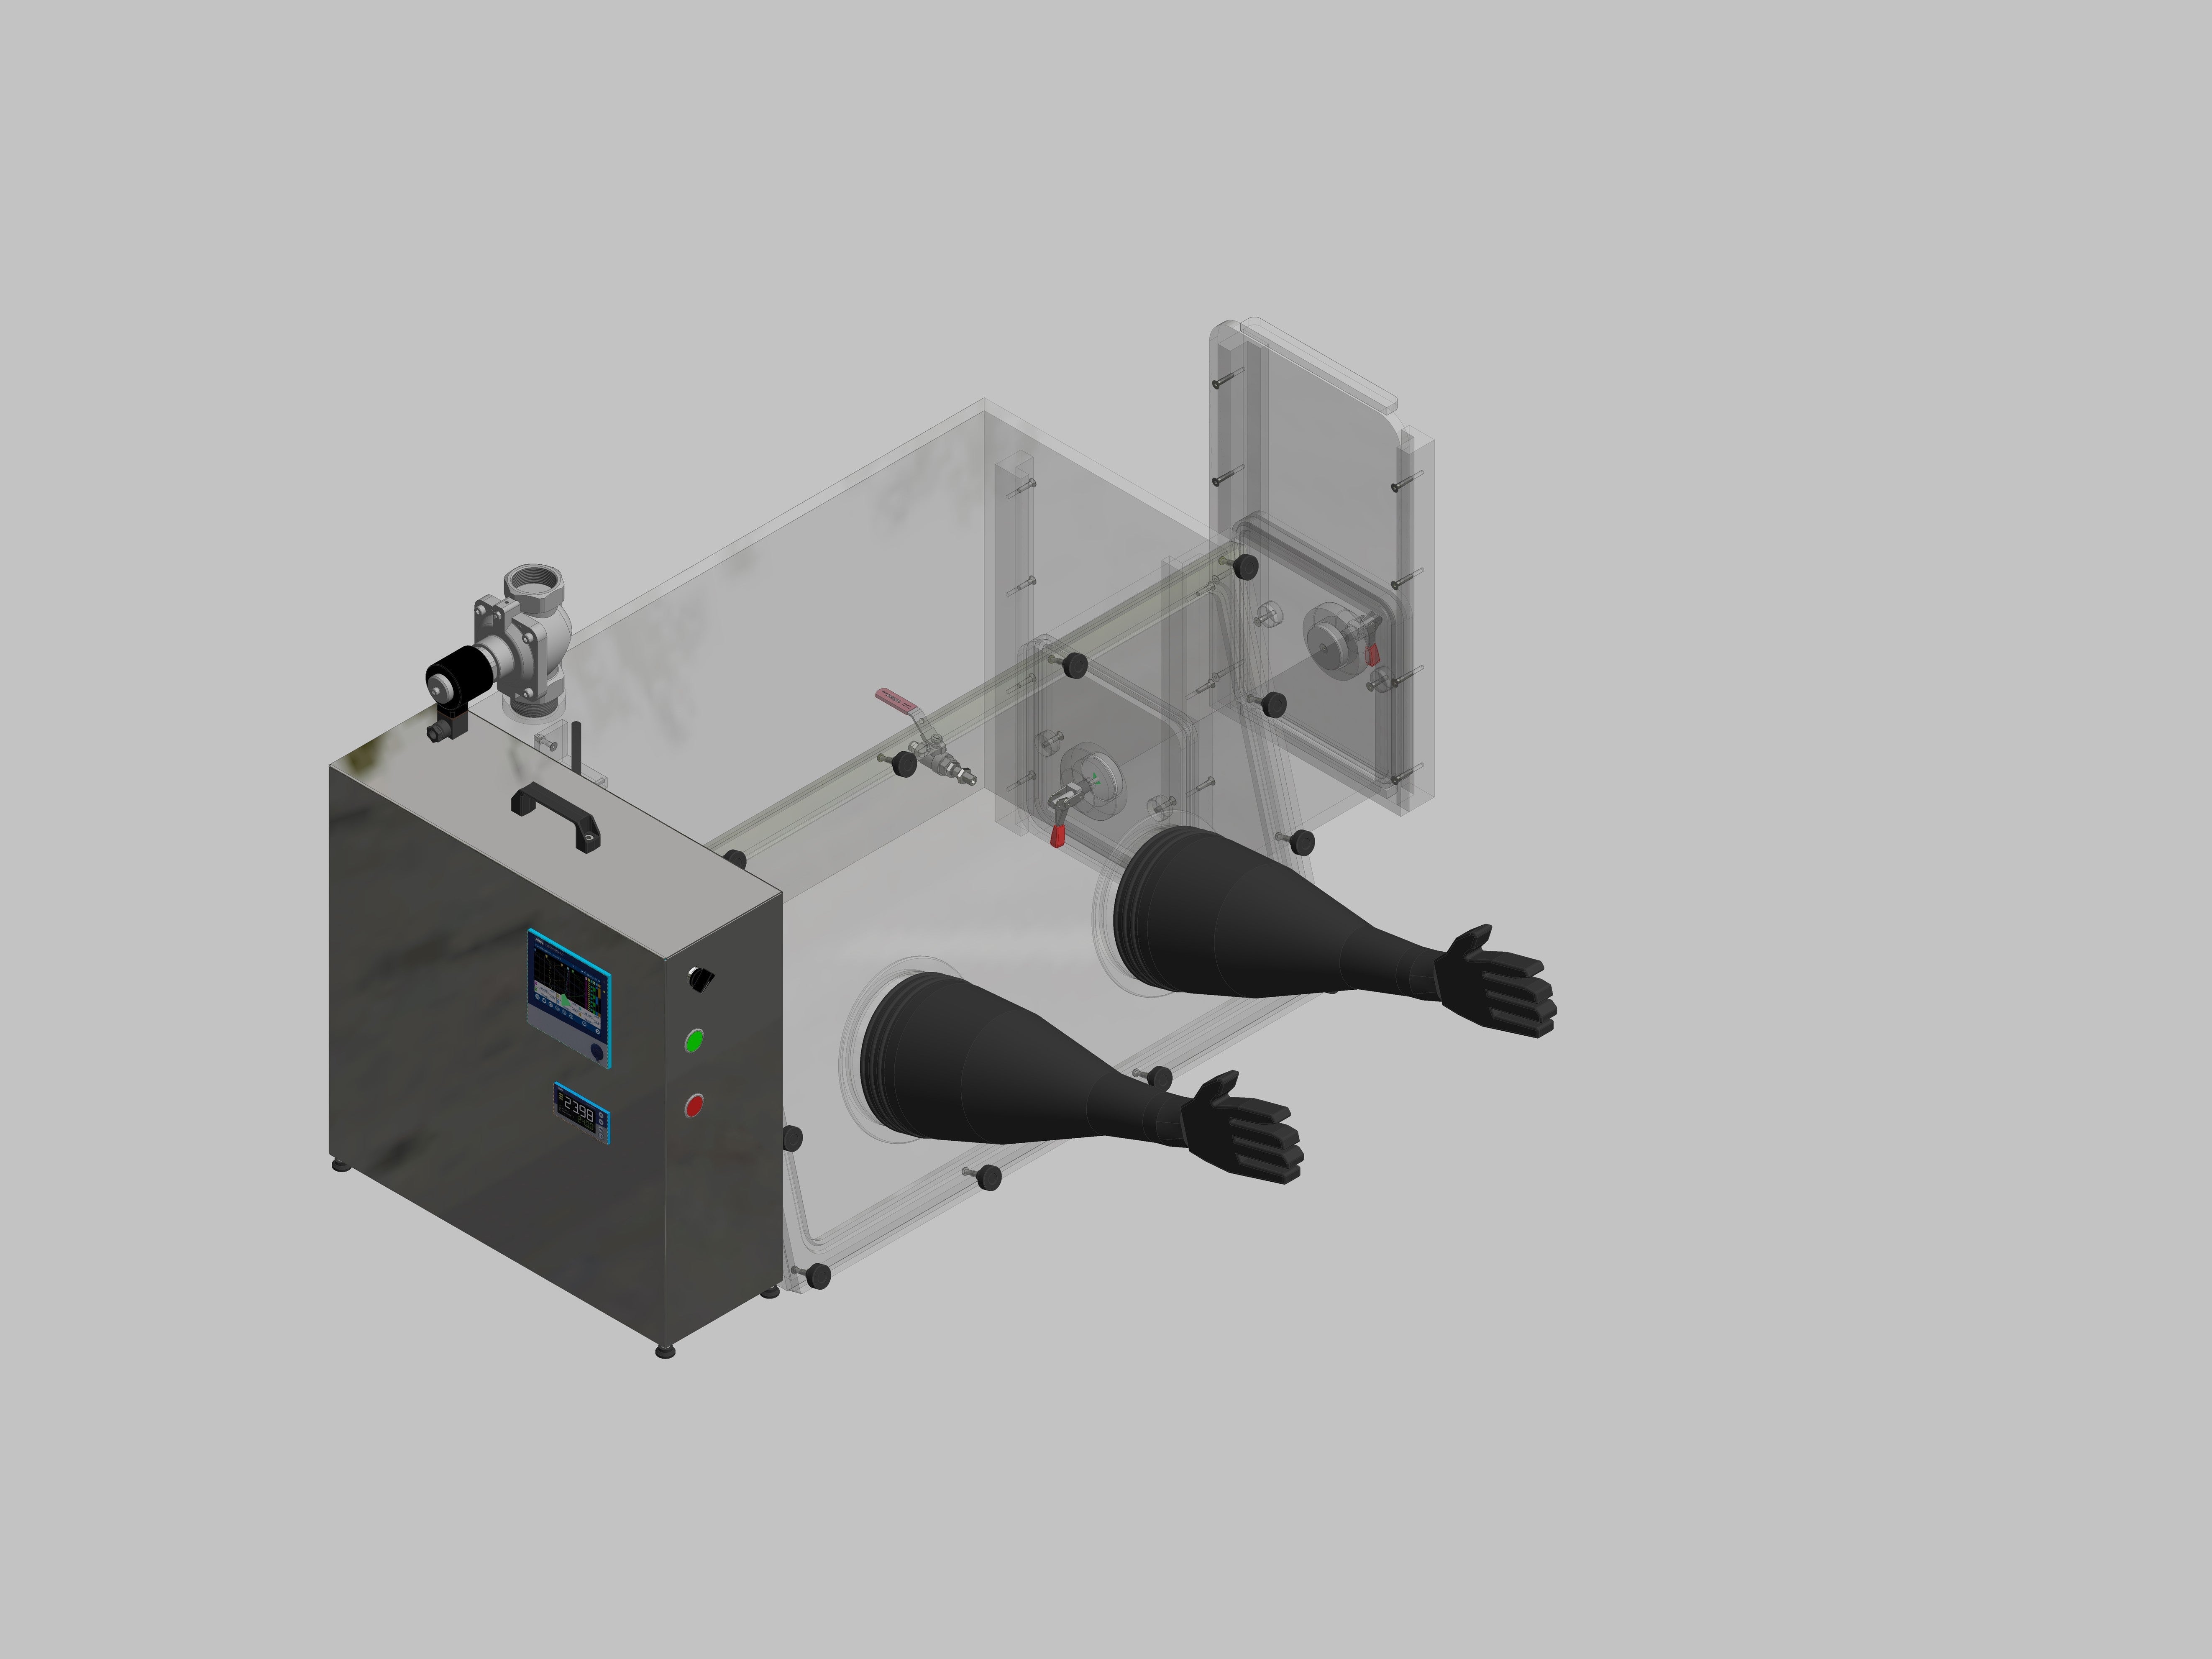 Glovebox made of acrylic&gt; Gas filling: automatic flushing with pressure control, front design: removable, side design: rectangular lock, control: humidity controller with data logger